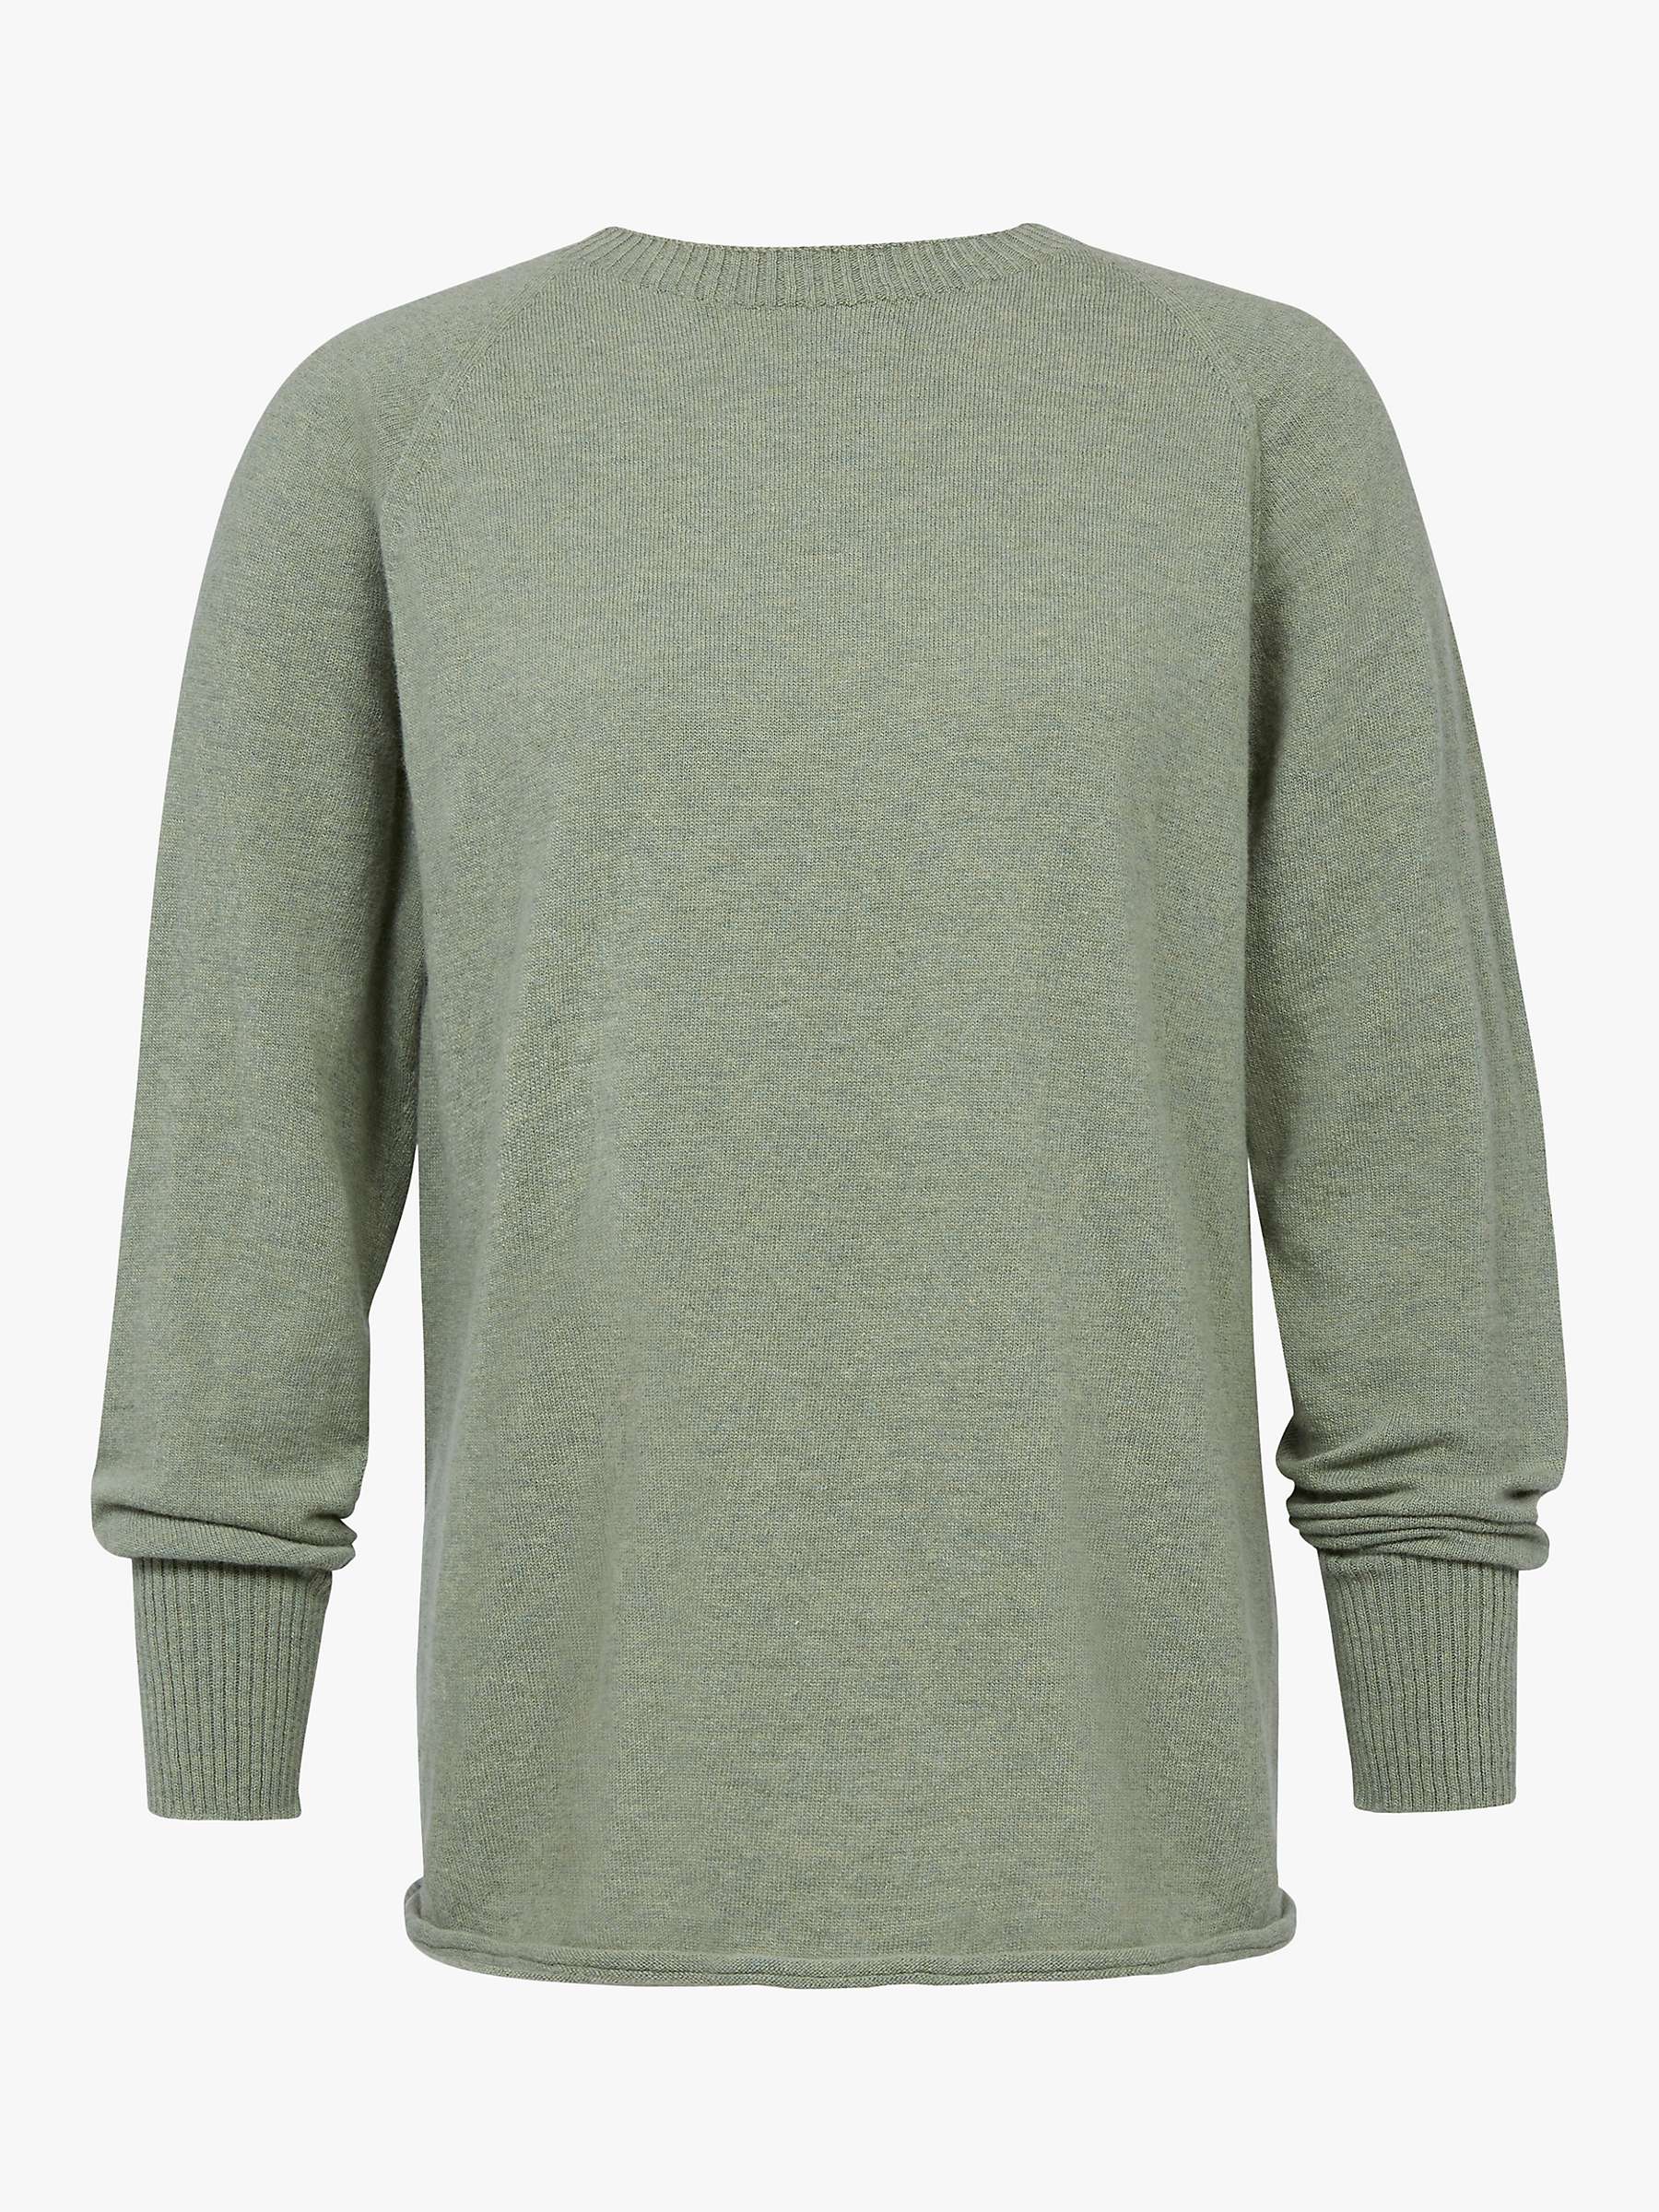 Buy Celtic & Co. Geelong Slouch Crew Neck Jumper Online at johnlewis.com